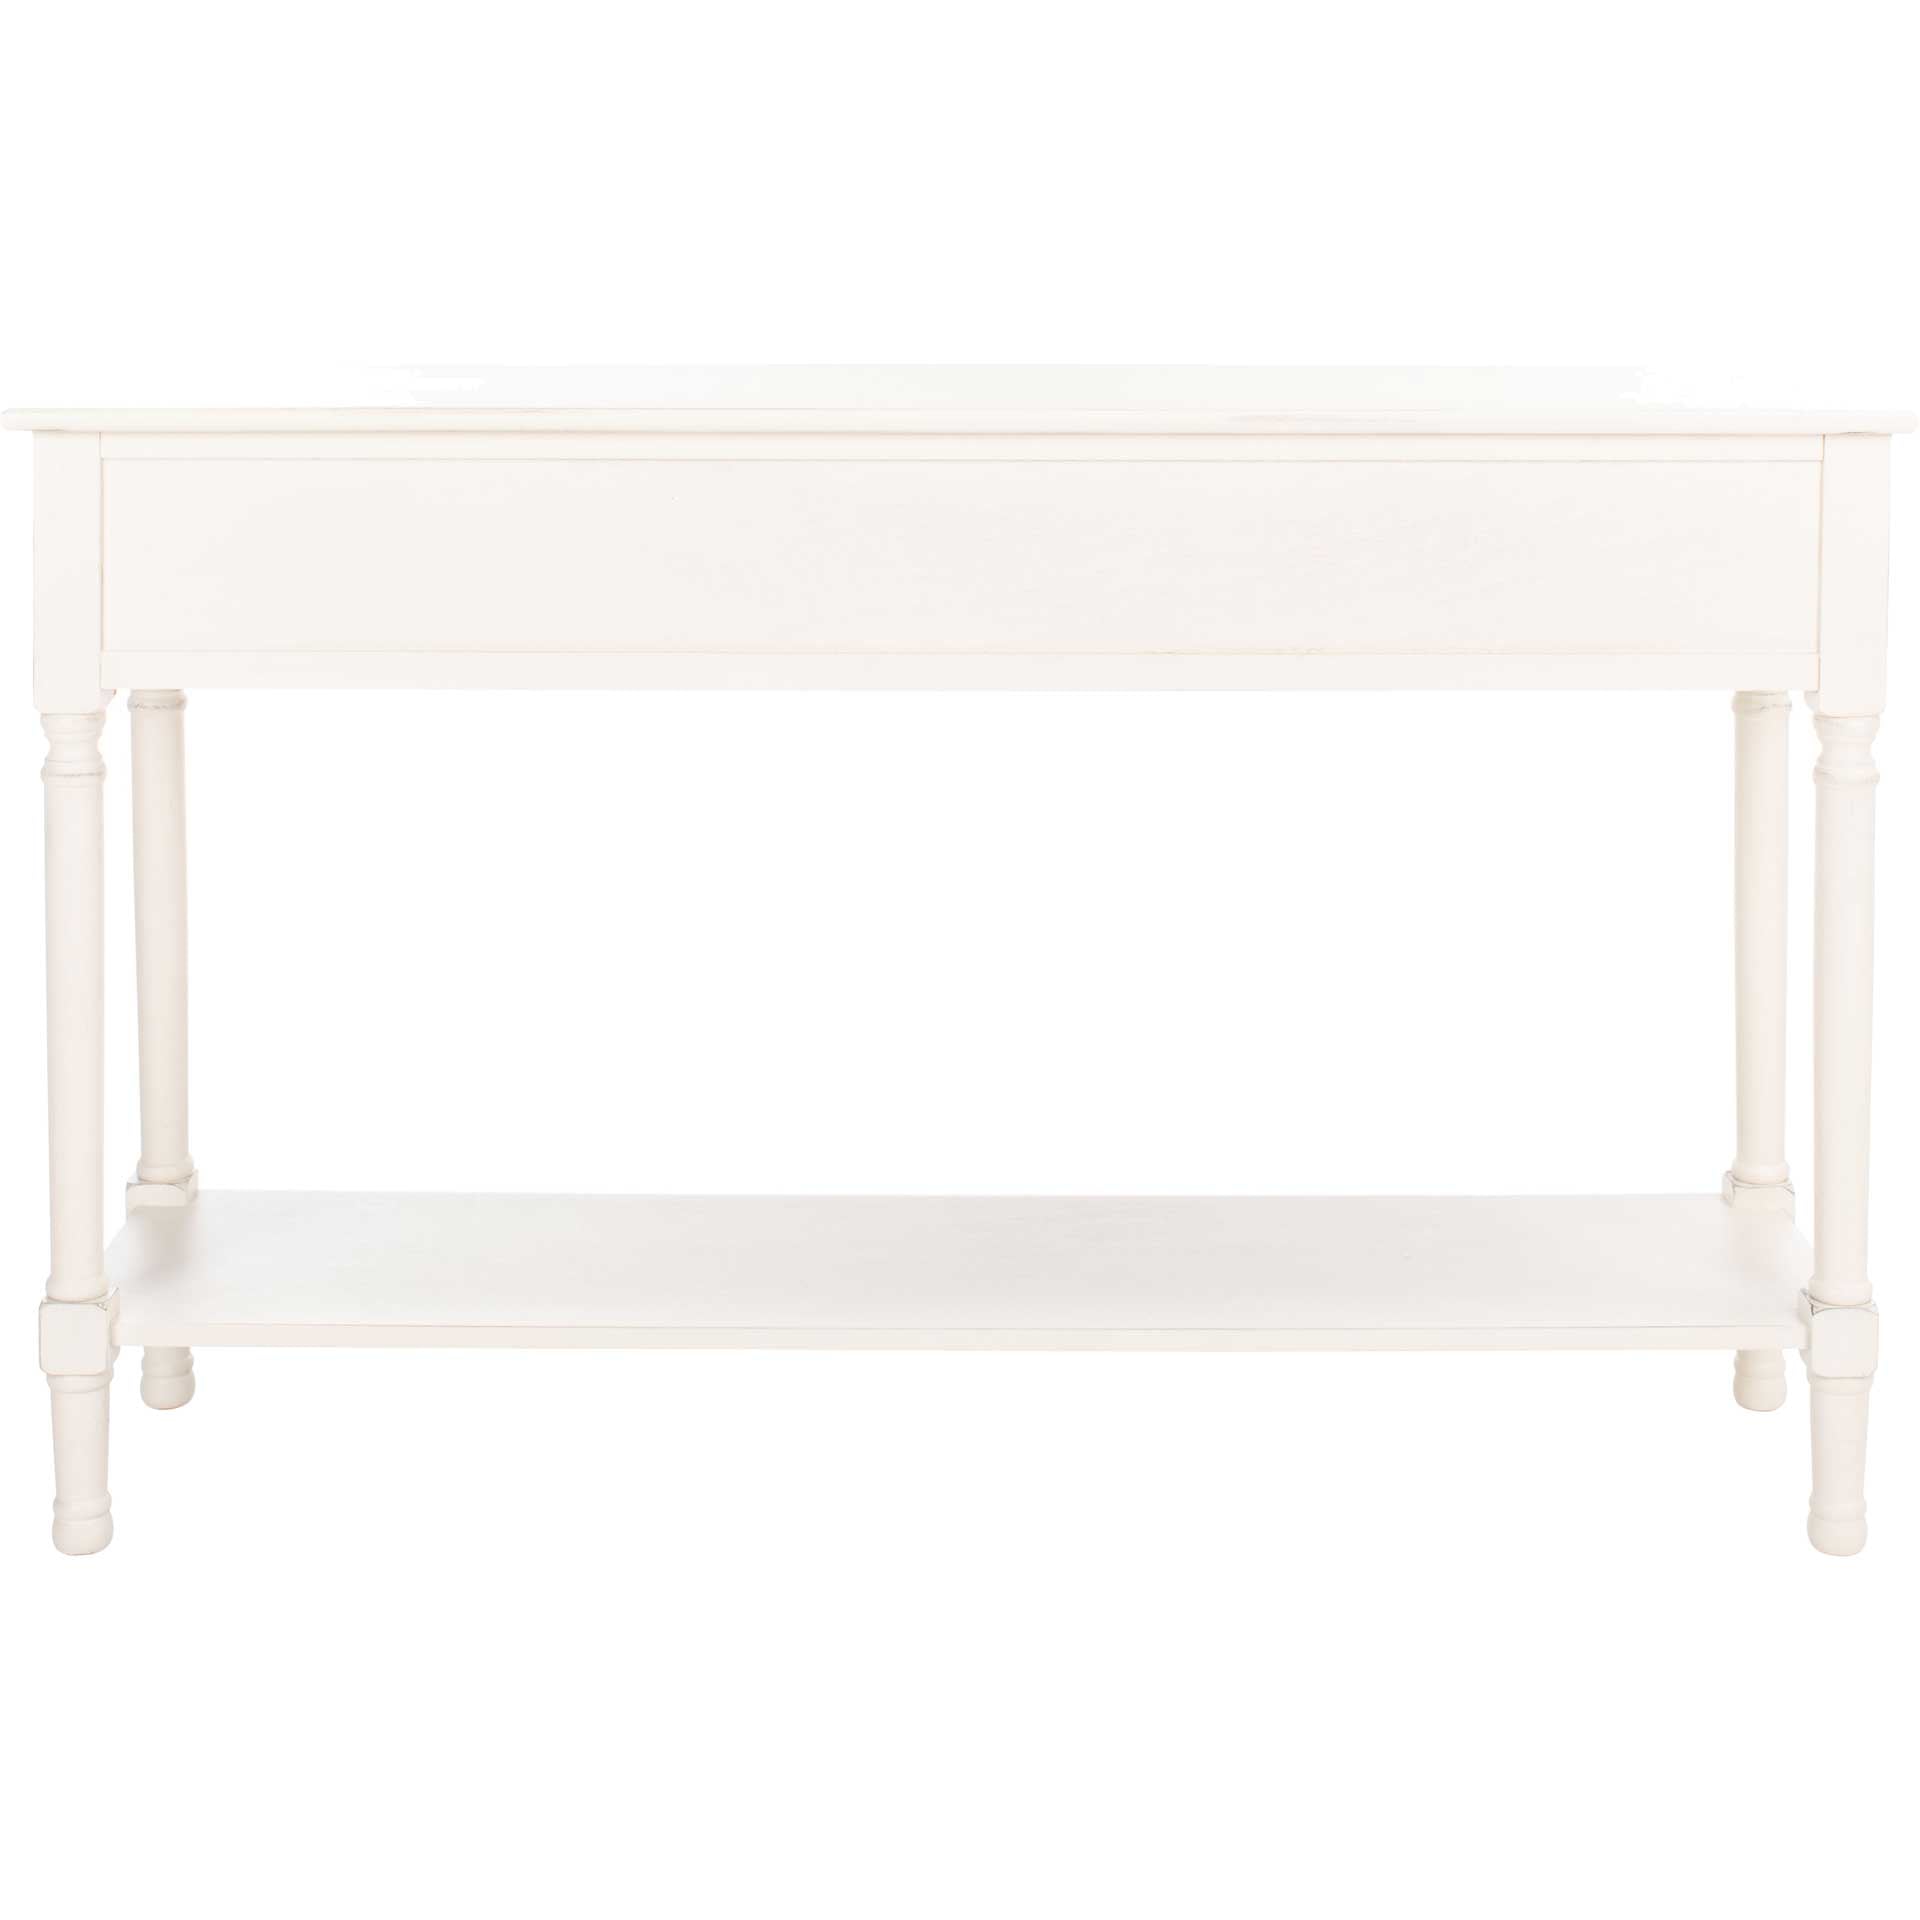 Pebbles 3 Drawer Console Table Distressed White